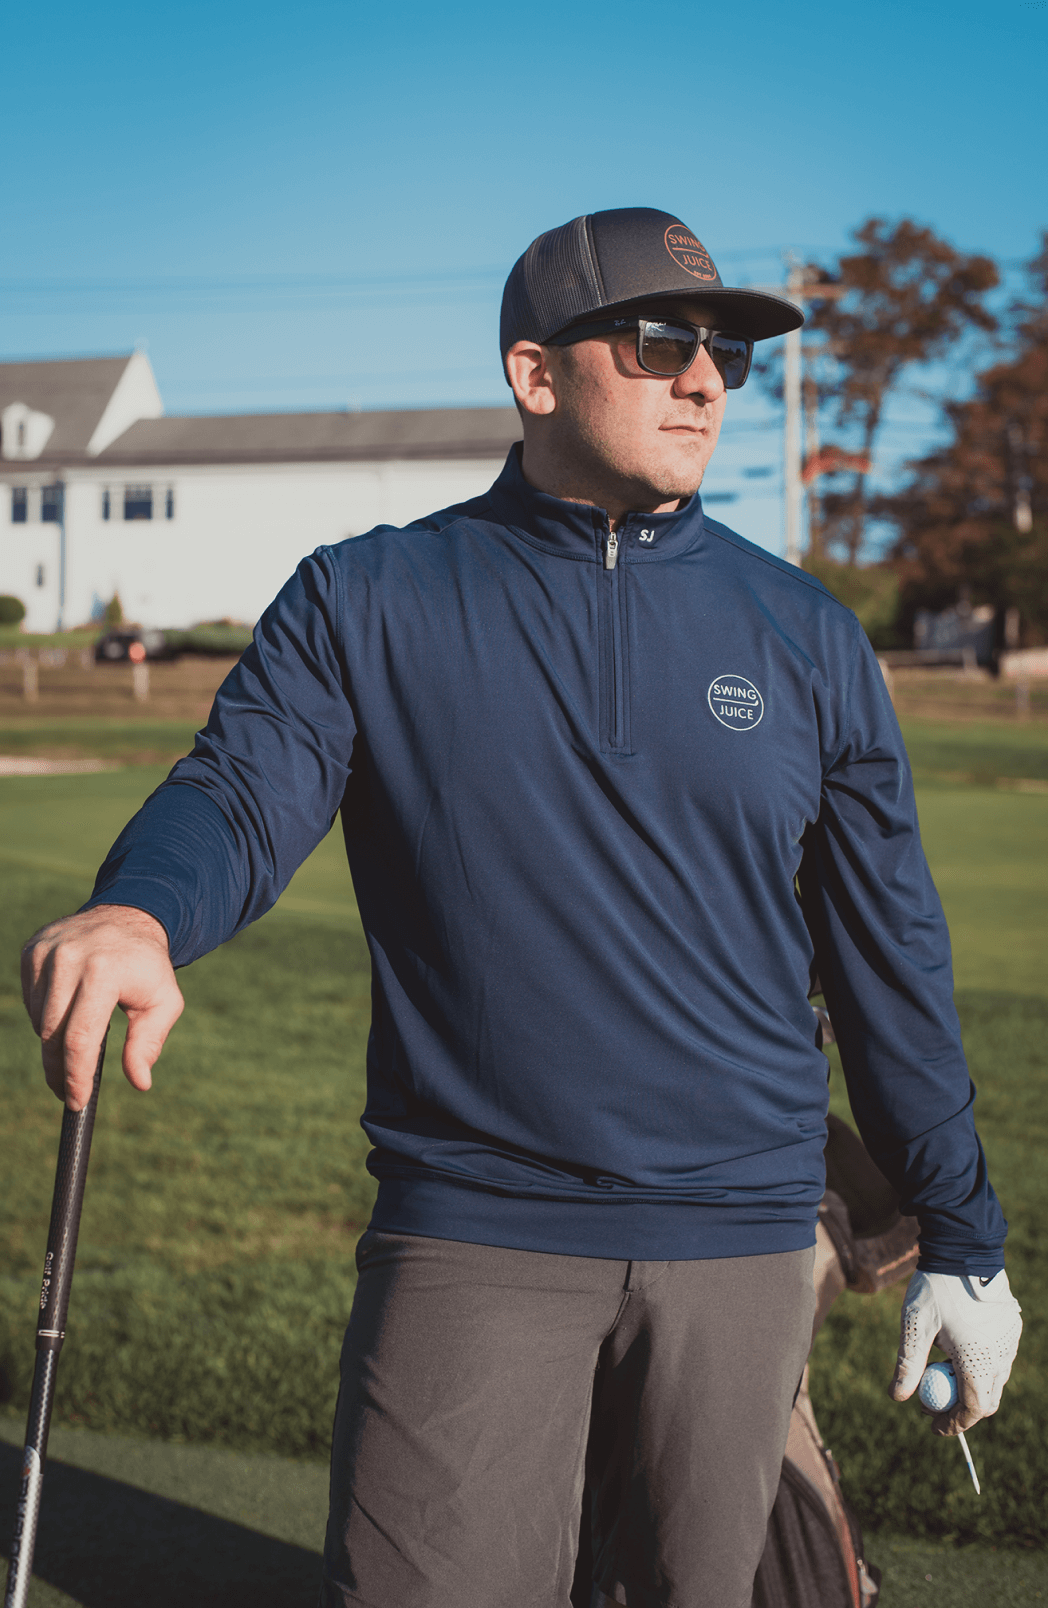 SwingJuice | A Fun Lifestyle Apparel Brand For Golf & More